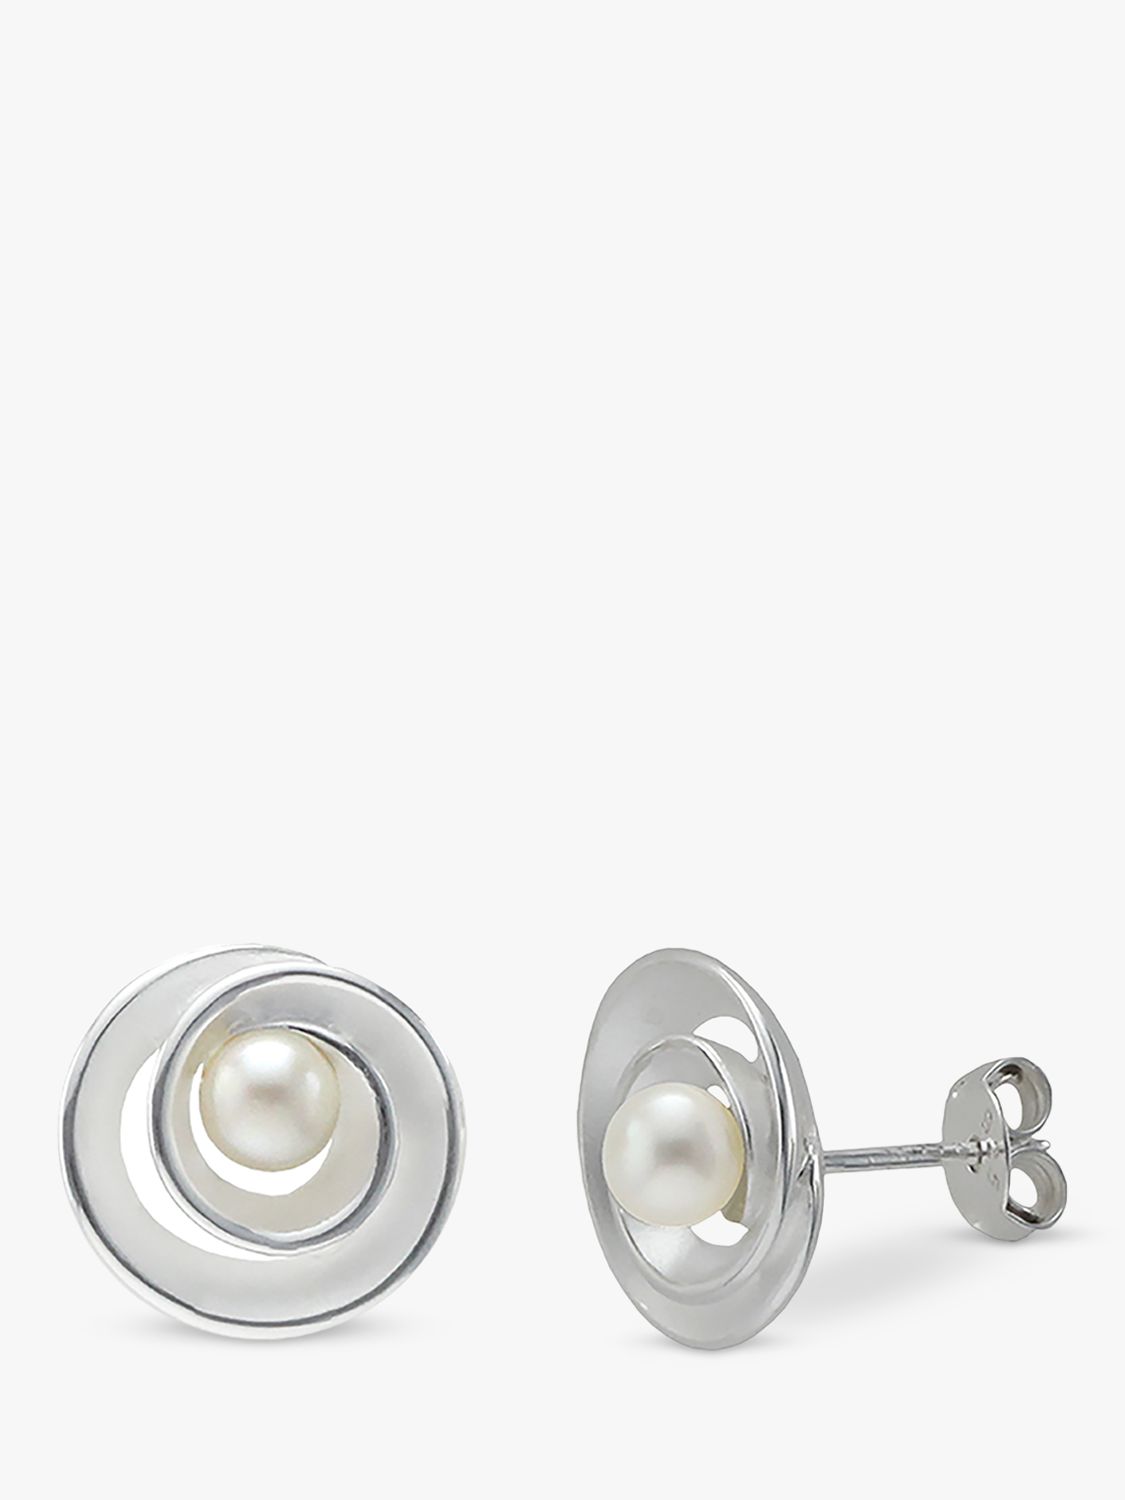 Buy Nina B Sterling Silver Freshwater Pearl Swirl Earring and Pendant Necklace Jewellery Set Online at johnlewis.com